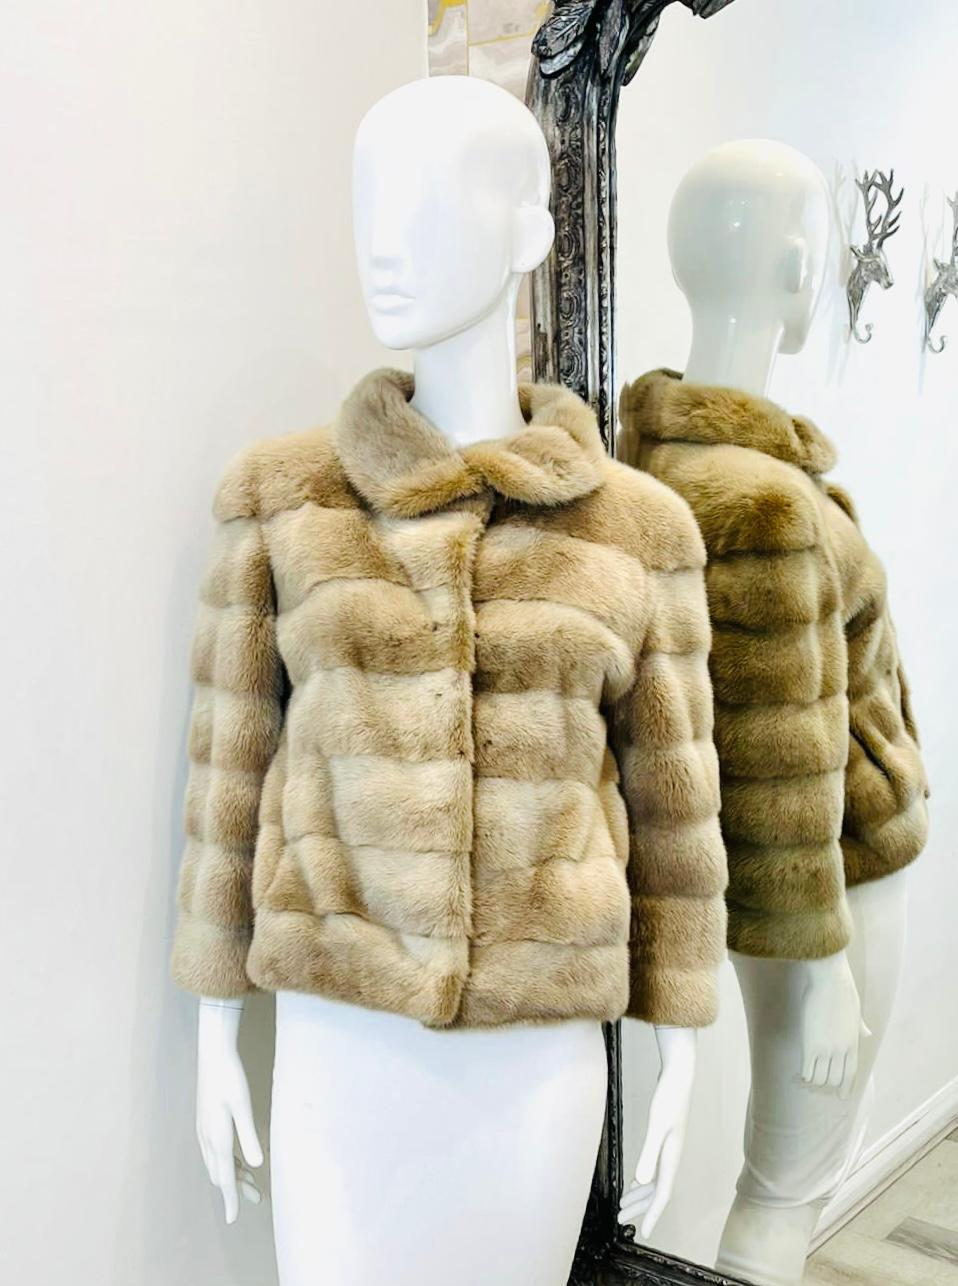 Hockley Mink Fur Jacket

Timeless blonde fur jacket detailed with glamorous panelled design.

Featuring spread collar, hook-and-eye fastening and two side pocket.

Size – M

Condition – Very Good

Composition – 100% Mink Fur